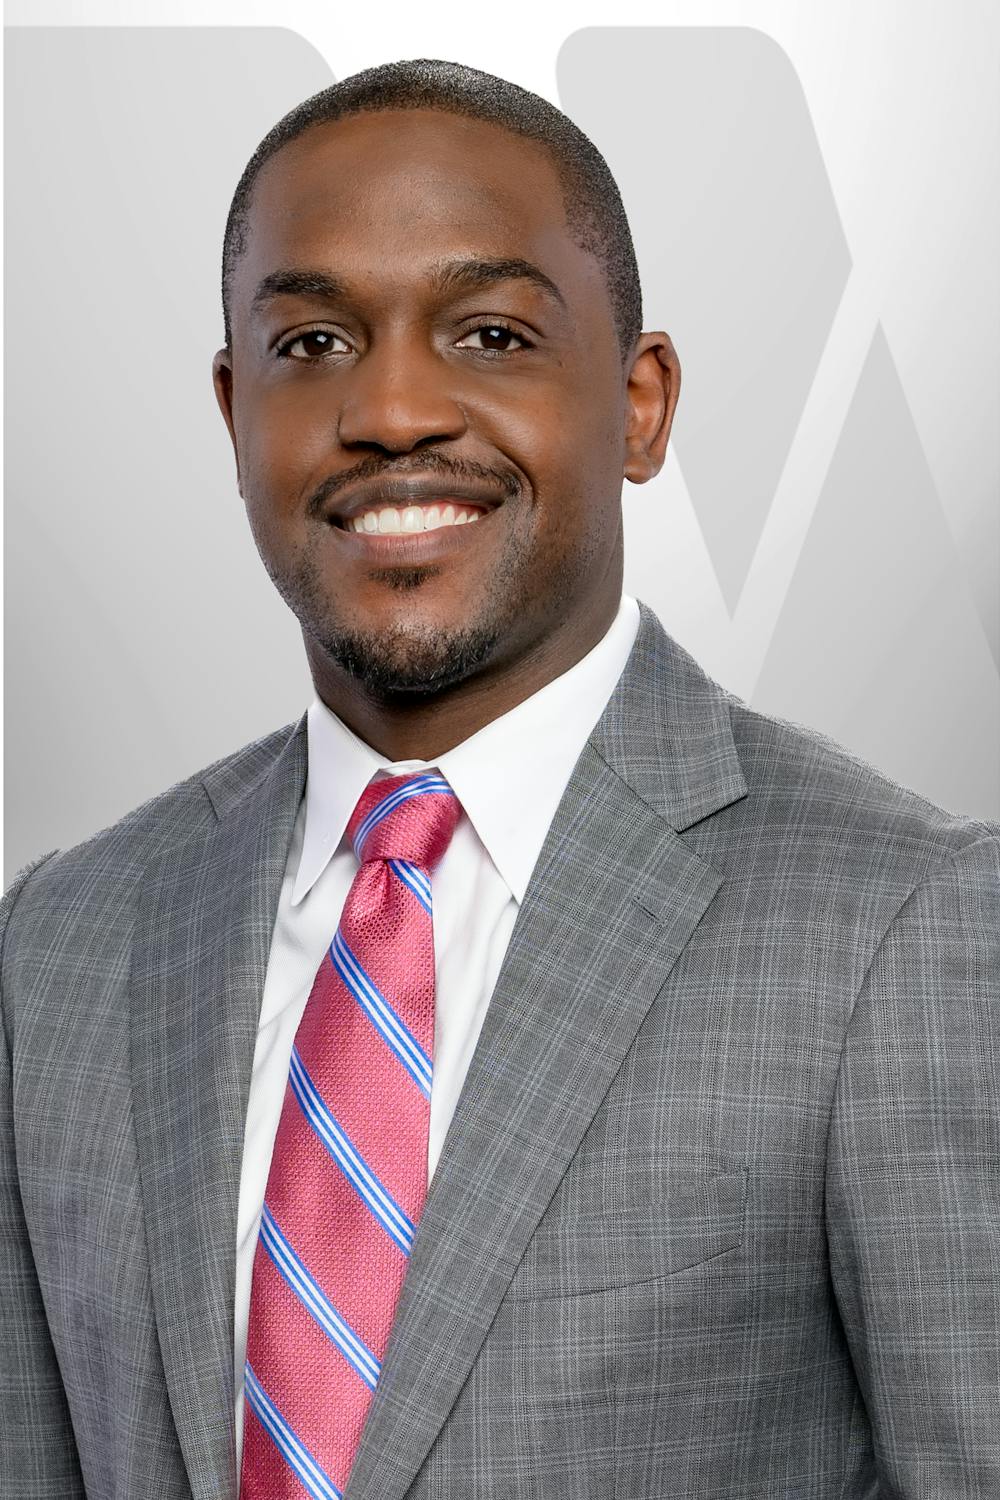 Attorney Adewale Odetunde Achieves Board Certification in Truck Accident Law By The National Board of Trial Advocacy